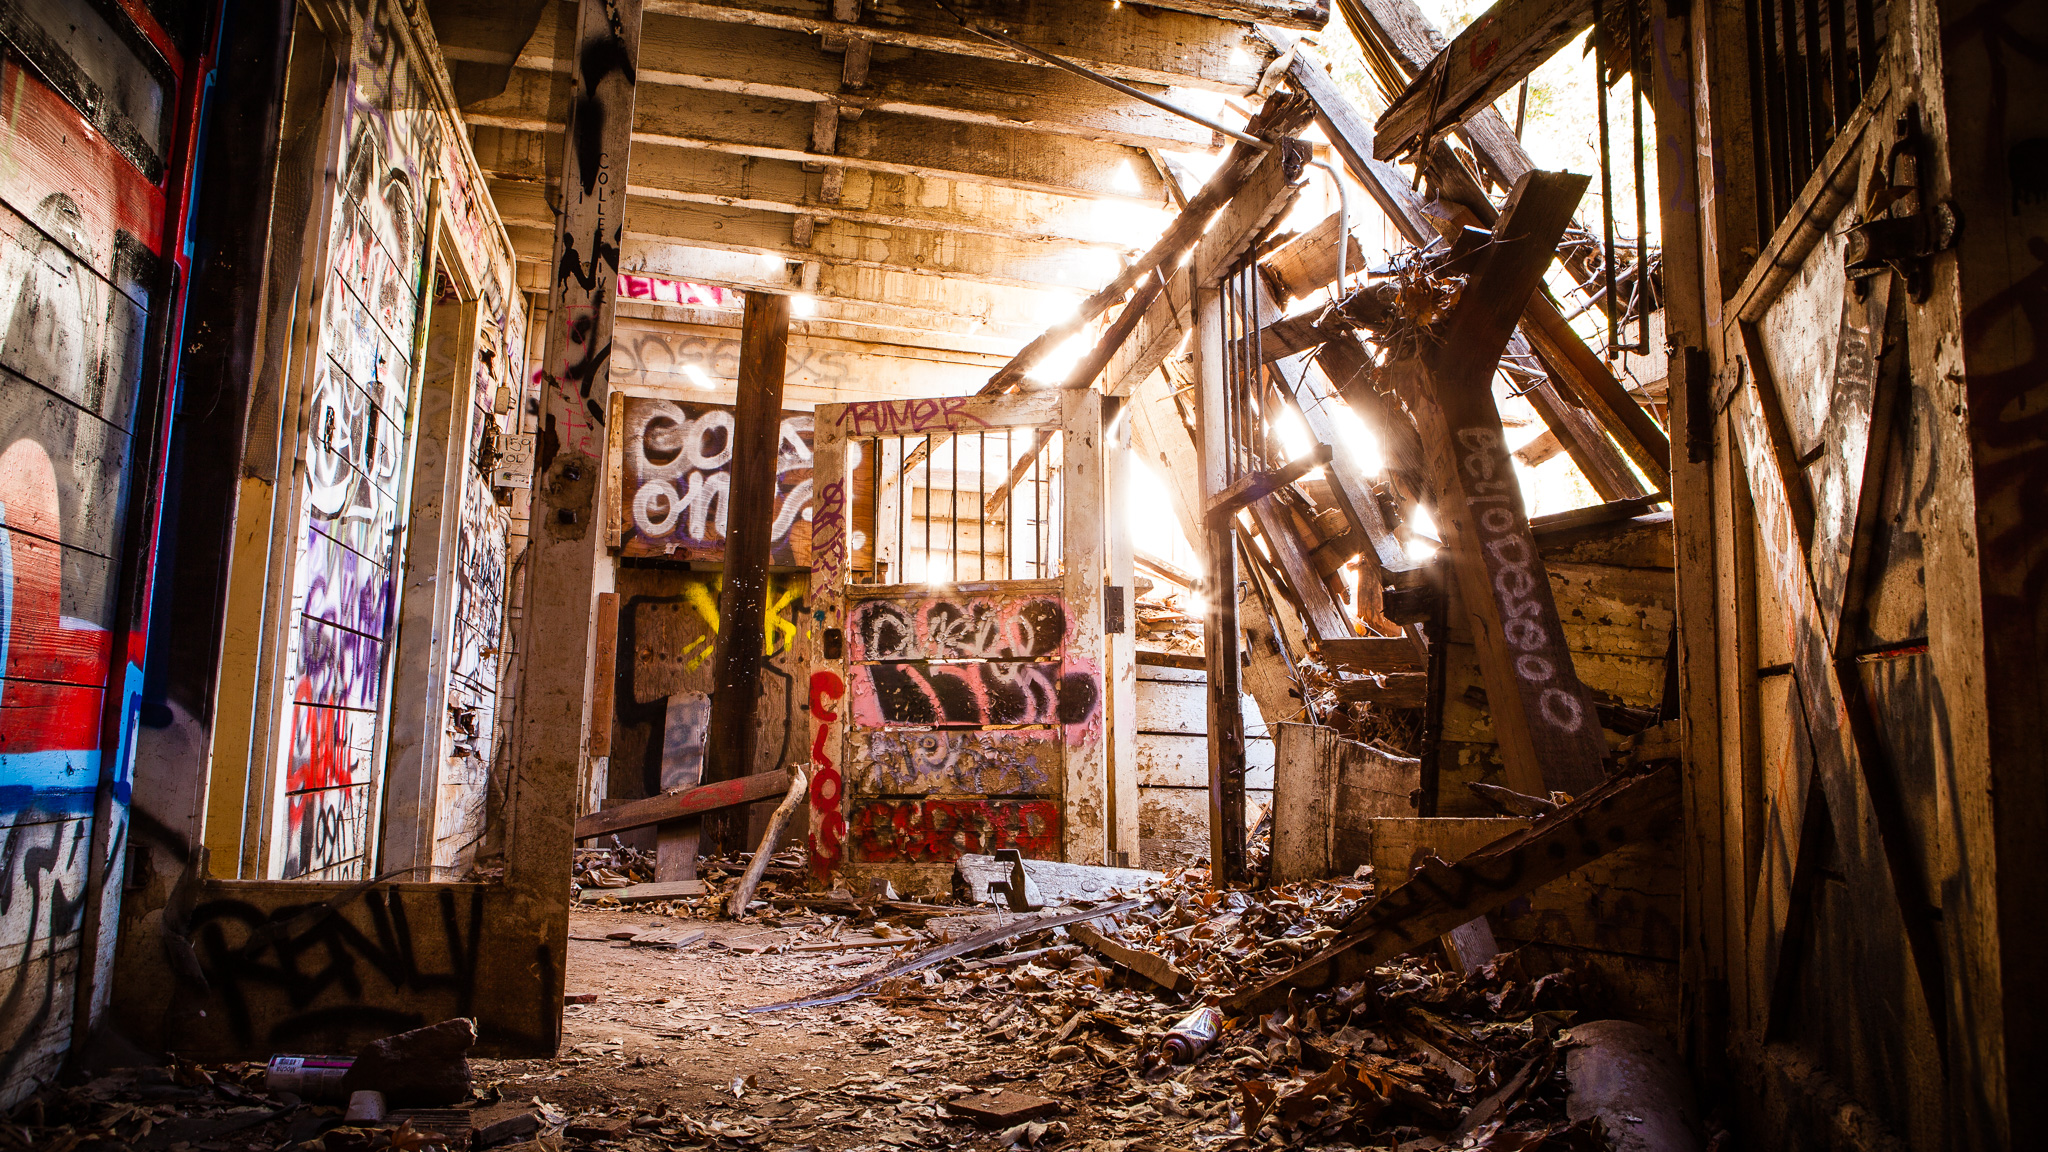 Abandoned Graffitied Barn House In Rustic Canyon, Los Angeles